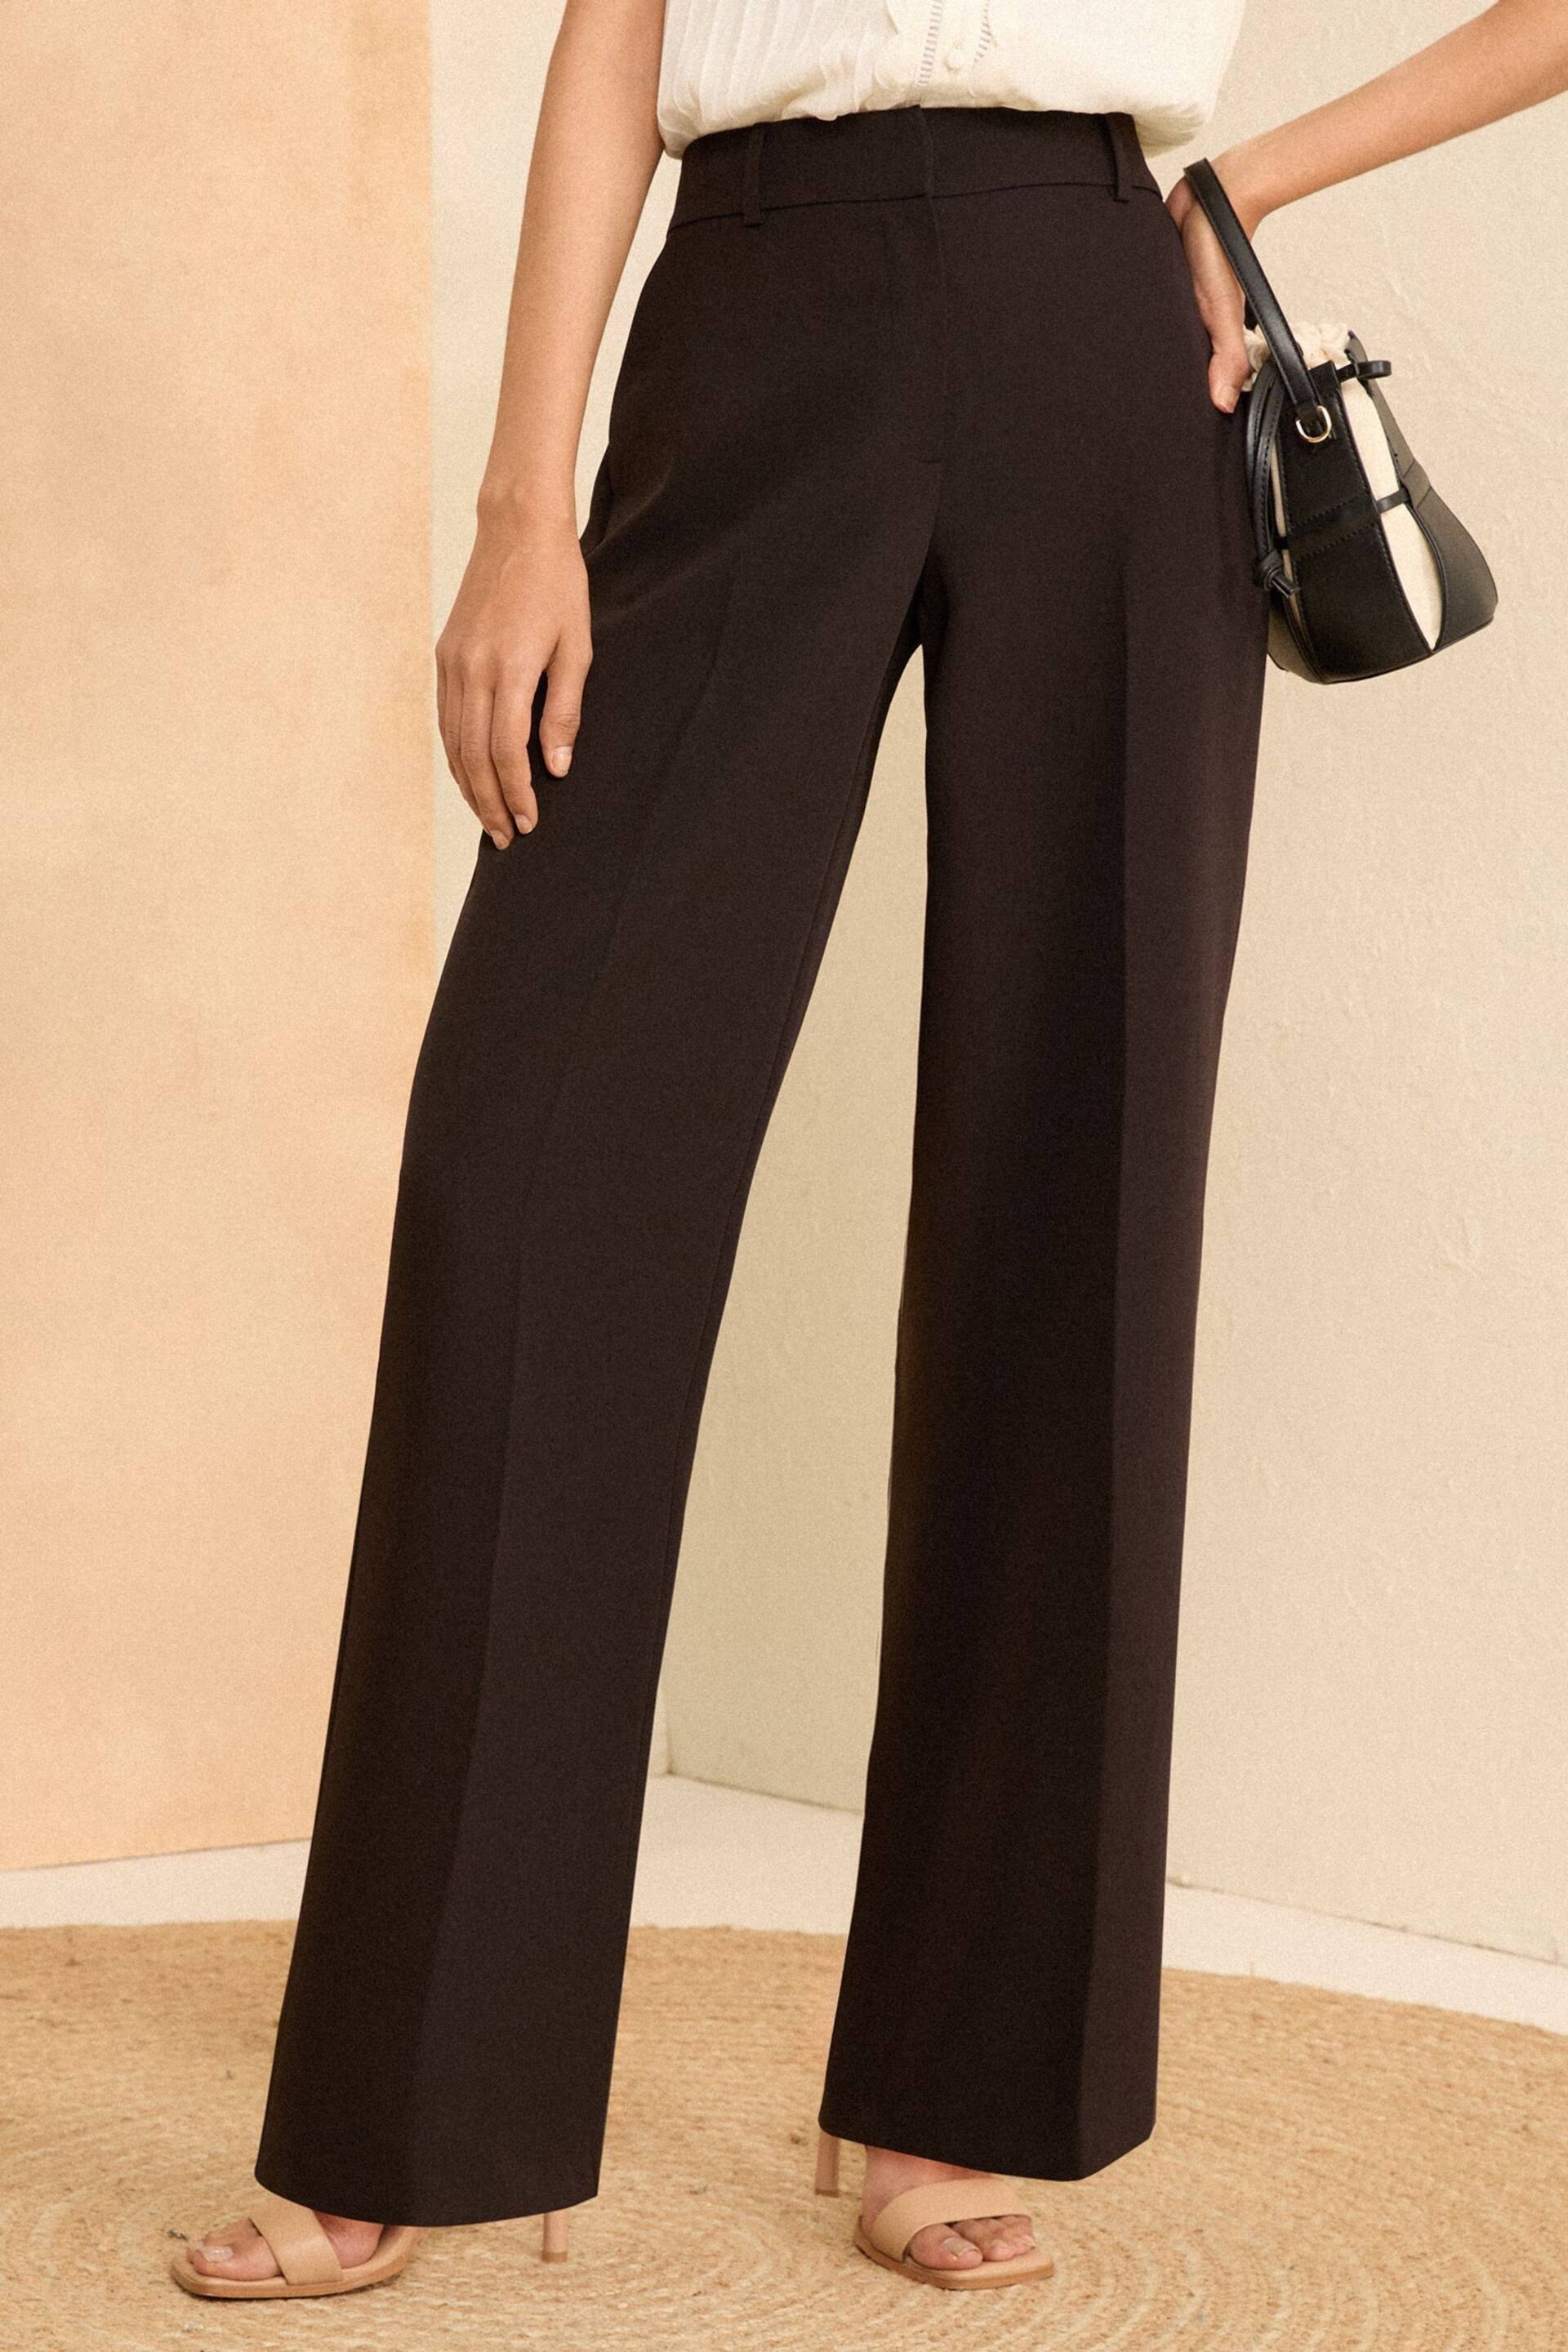 Love & Roses Black Tall High Waist Wide Leg Tailored Trousers - Image 1 of 4